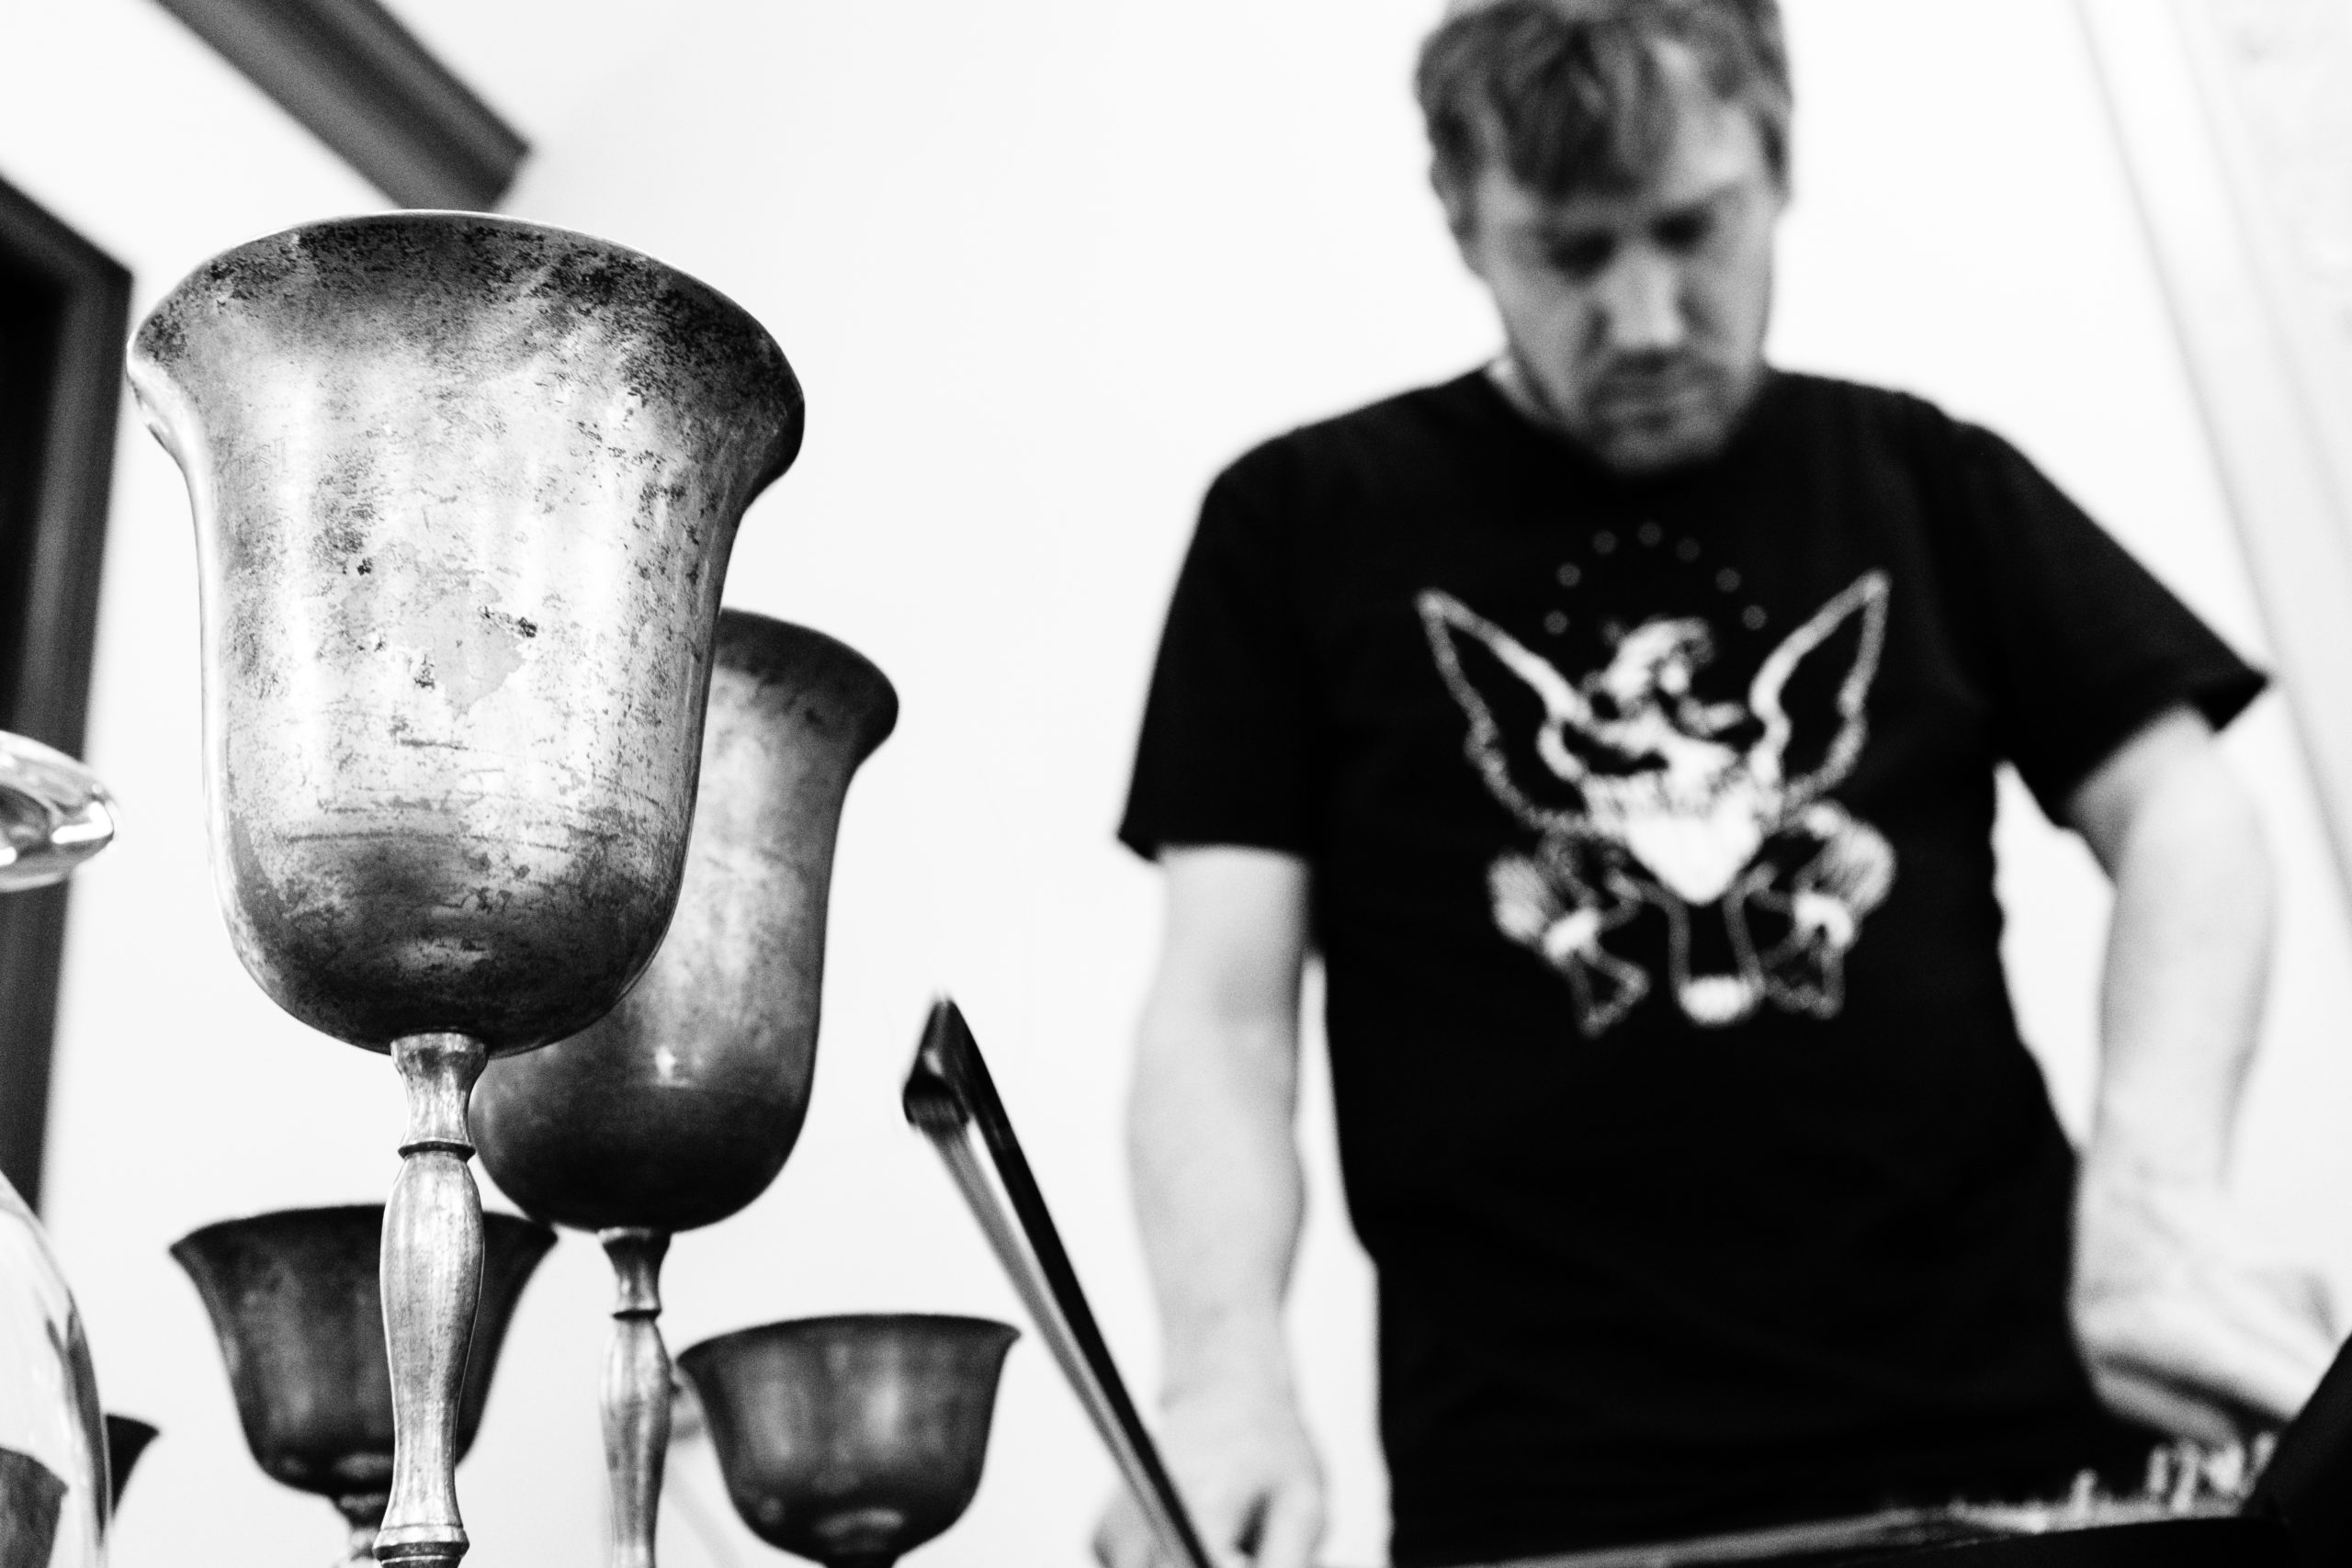 A black and white semi-focused shot of brass cups. A male musician with a dark black t-shirt stands behind, semi-blurred, playing music.